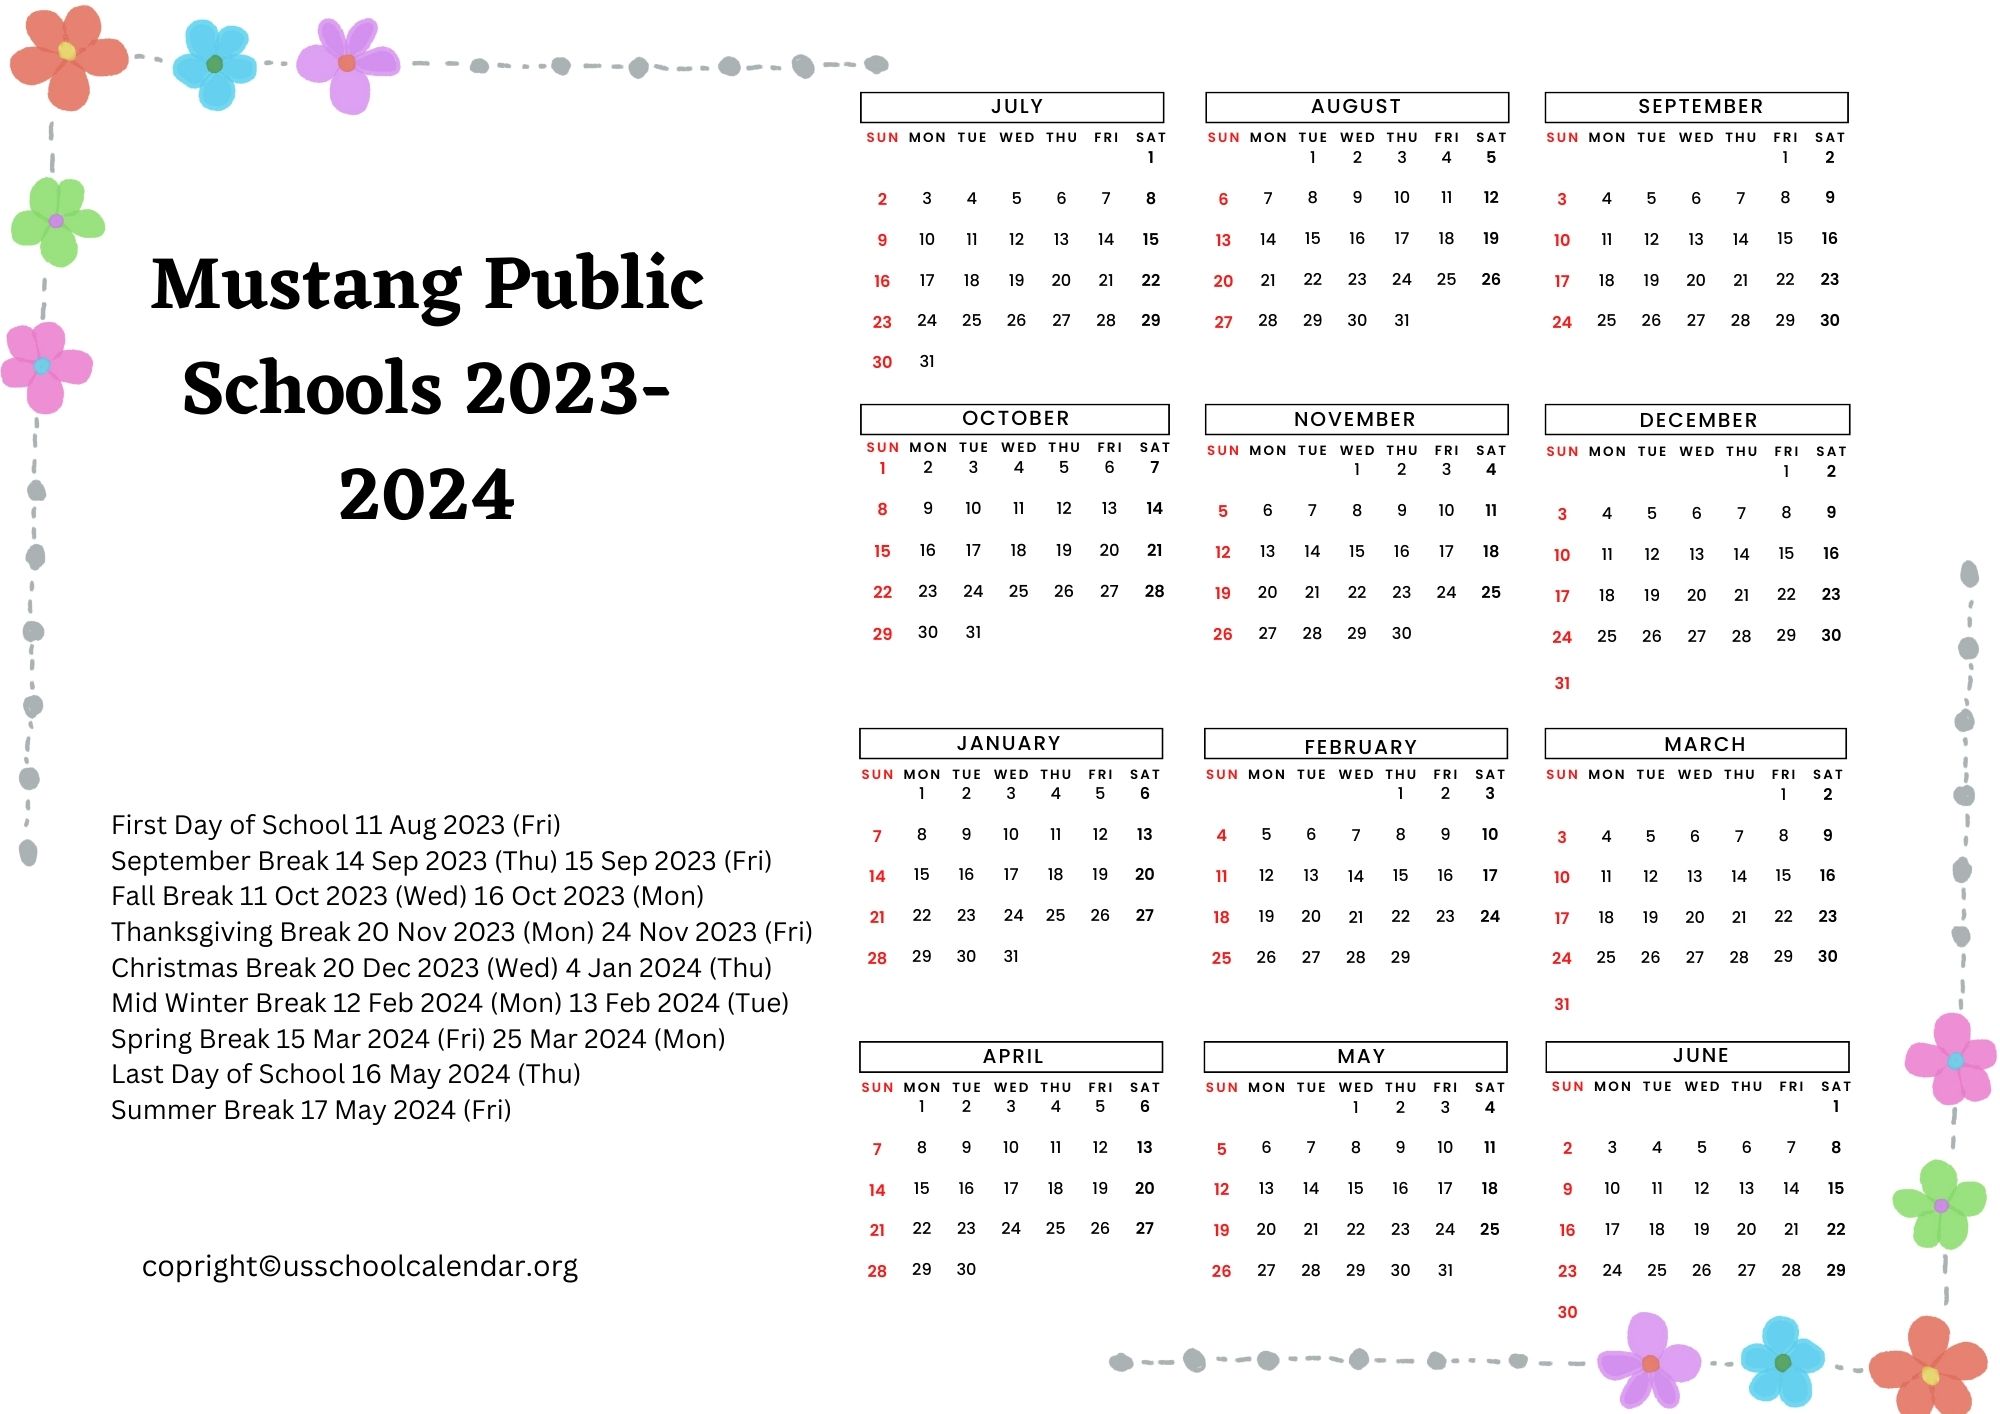 Mustang Public Schools Calendar with Holidays 20232024